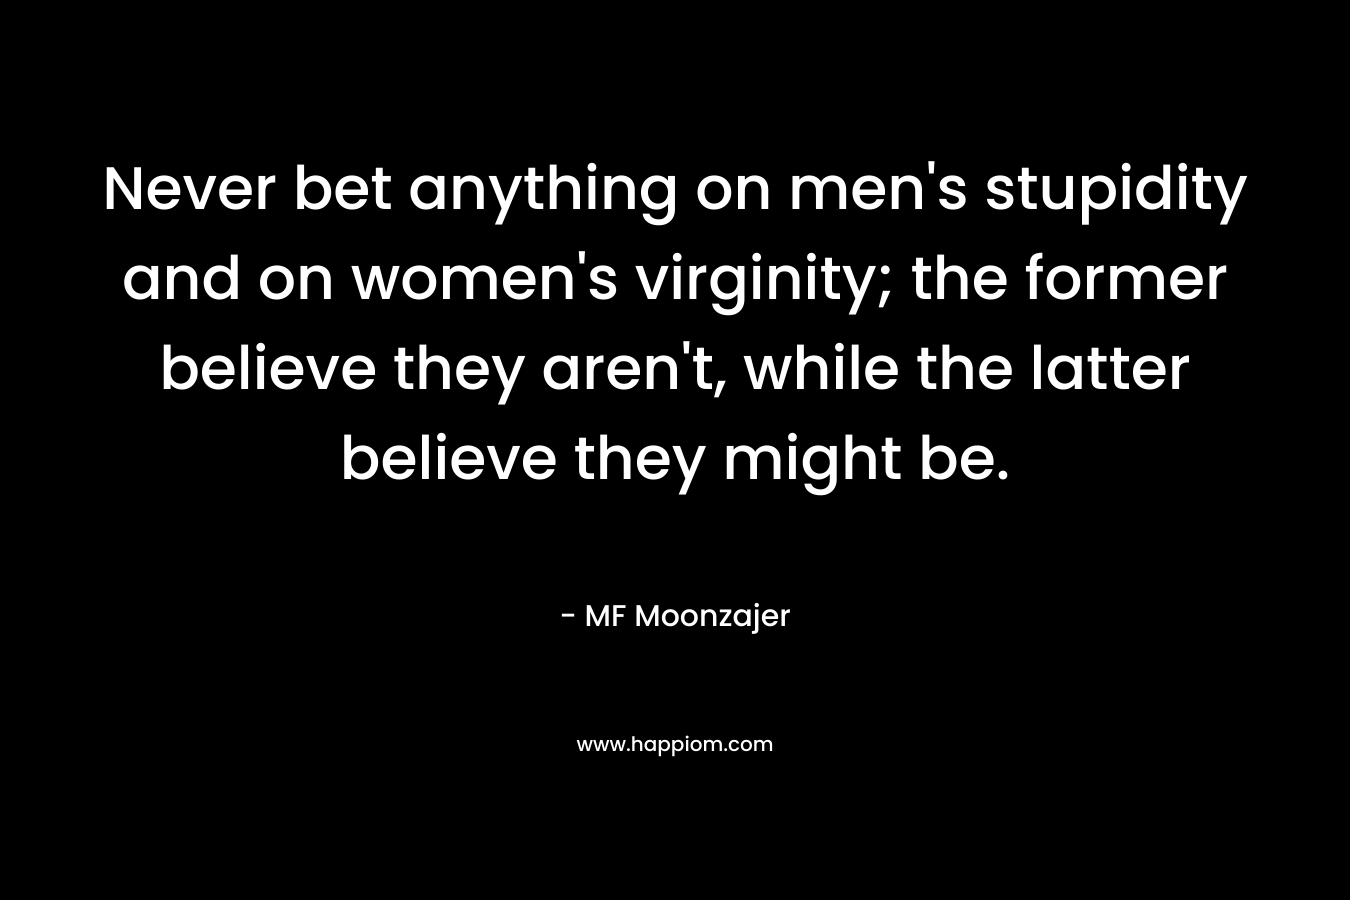 Never bet anything on men’s stupidity and on women’s virginity; the former believe they aren’t, while the latter believe they might be. – MF Moonzajer